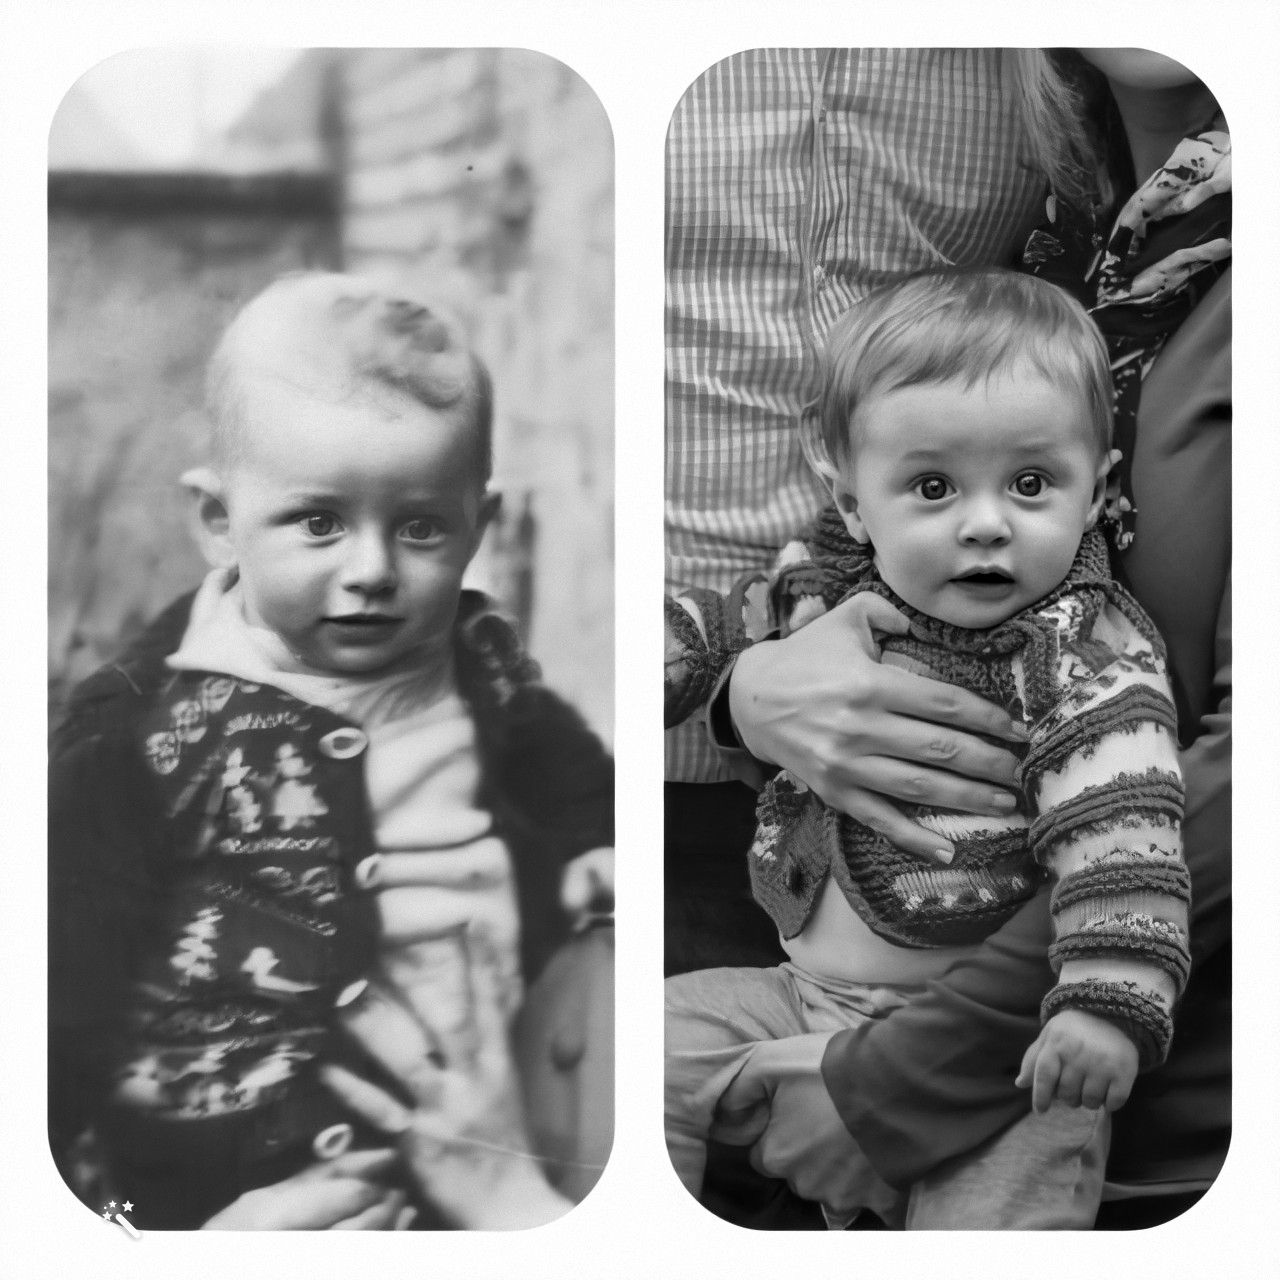 Grandson-grandfather lookalikes: Images of very similar-lookin young boys side by side